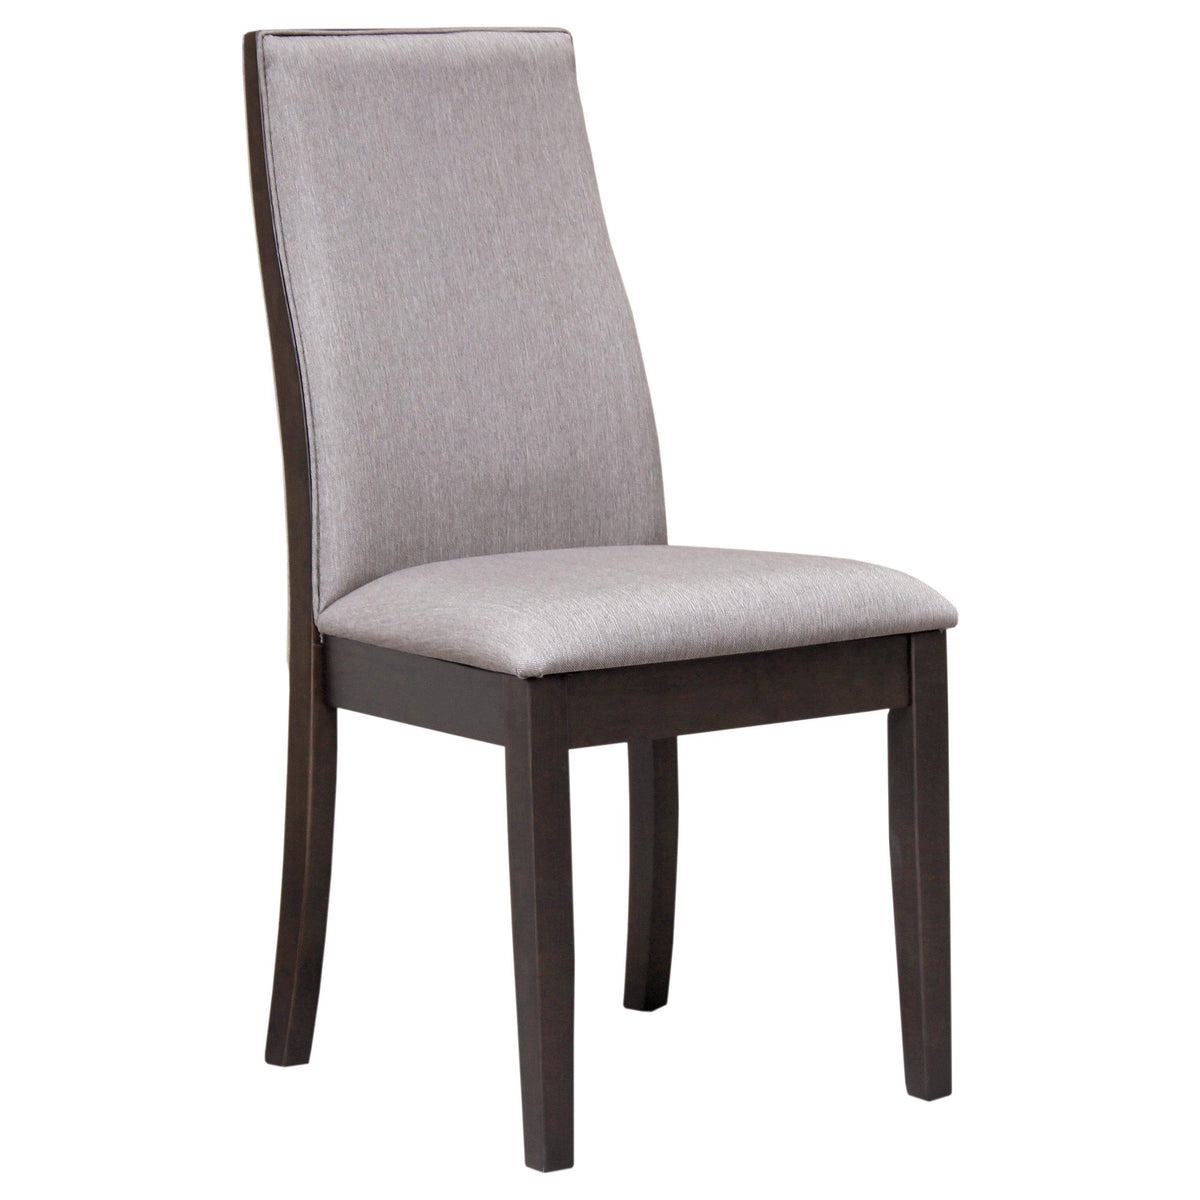 Spring Creek Upholstered Side Chairs Taupe (Set of 2) Spring Creek Upholstered Side Chairs Taupe (Set of 2) Half Price Furniture